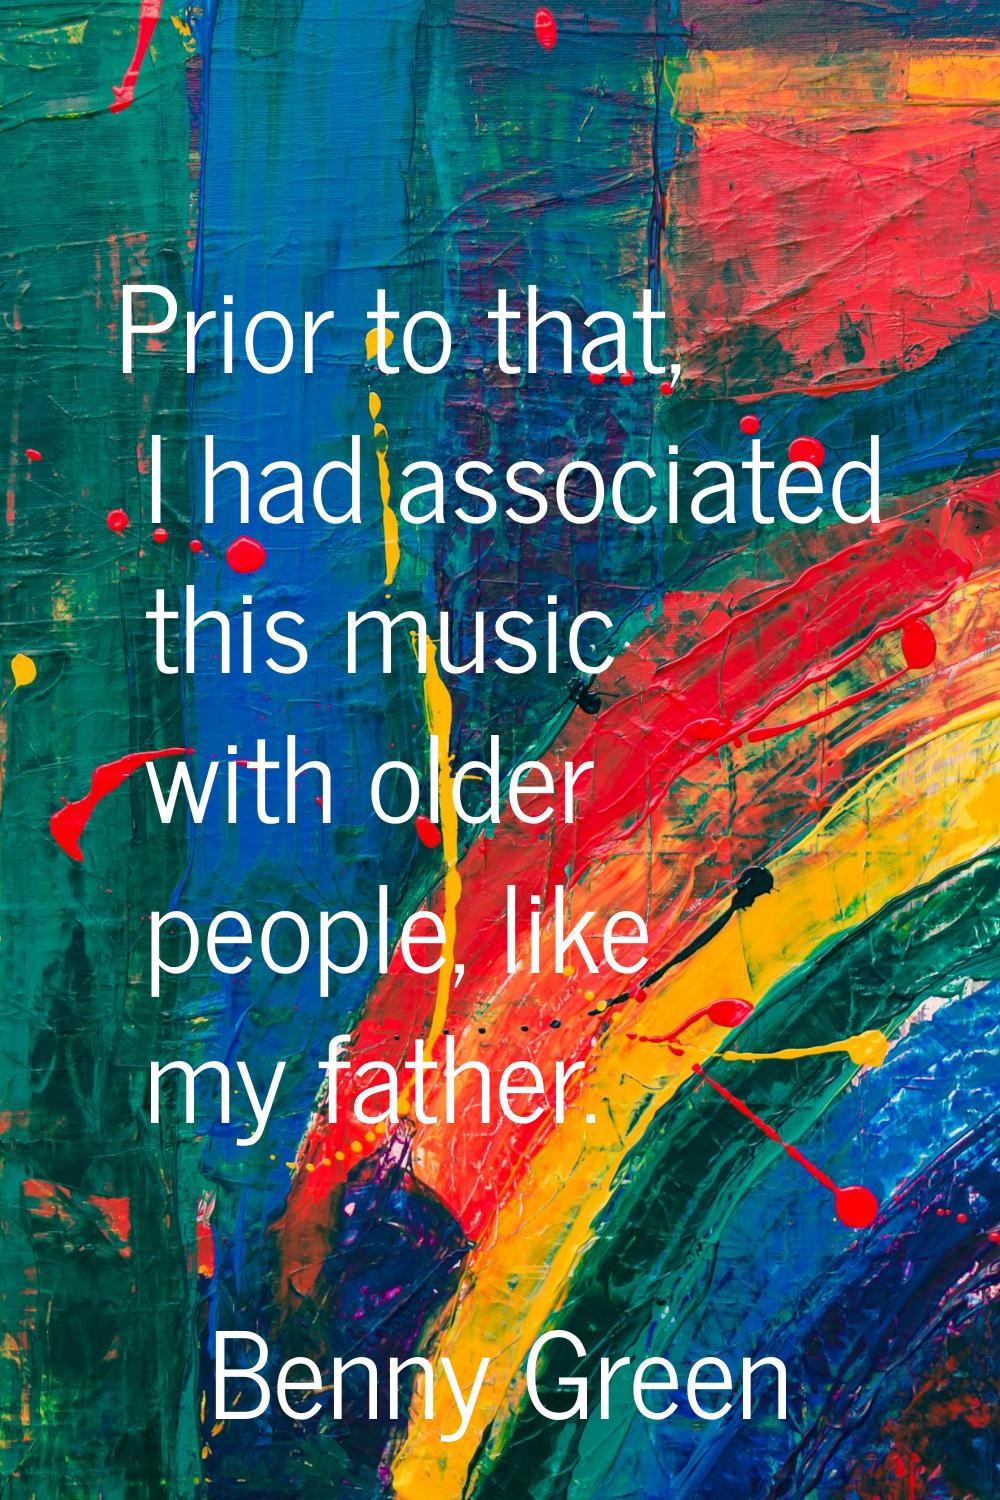 Prior to that, I had associated this music with older people, like my father.